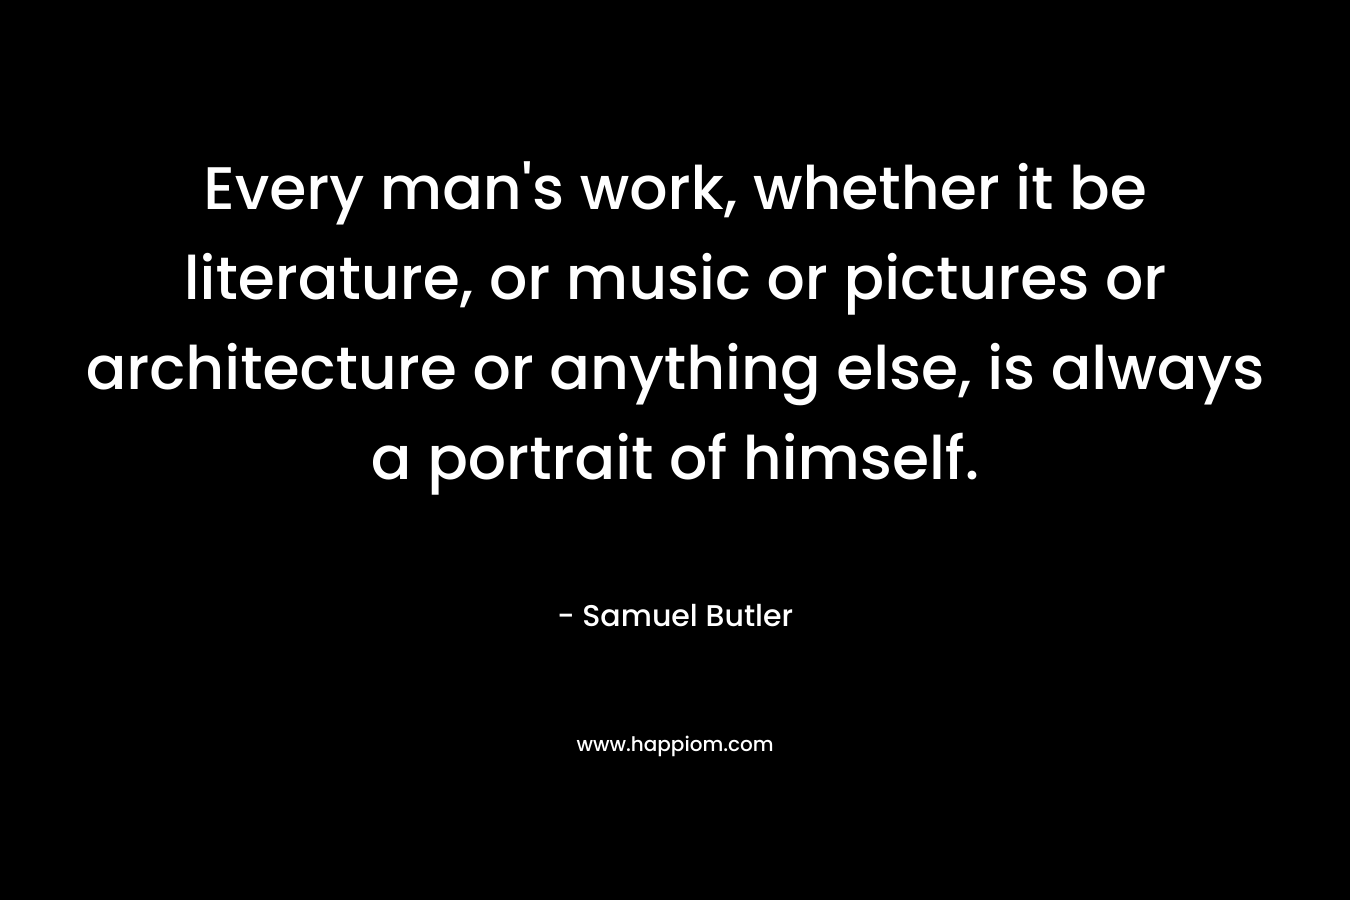 Every man's work, whether it be literature, or music or pictures or architecture or anything else, is always a portrait of himself.